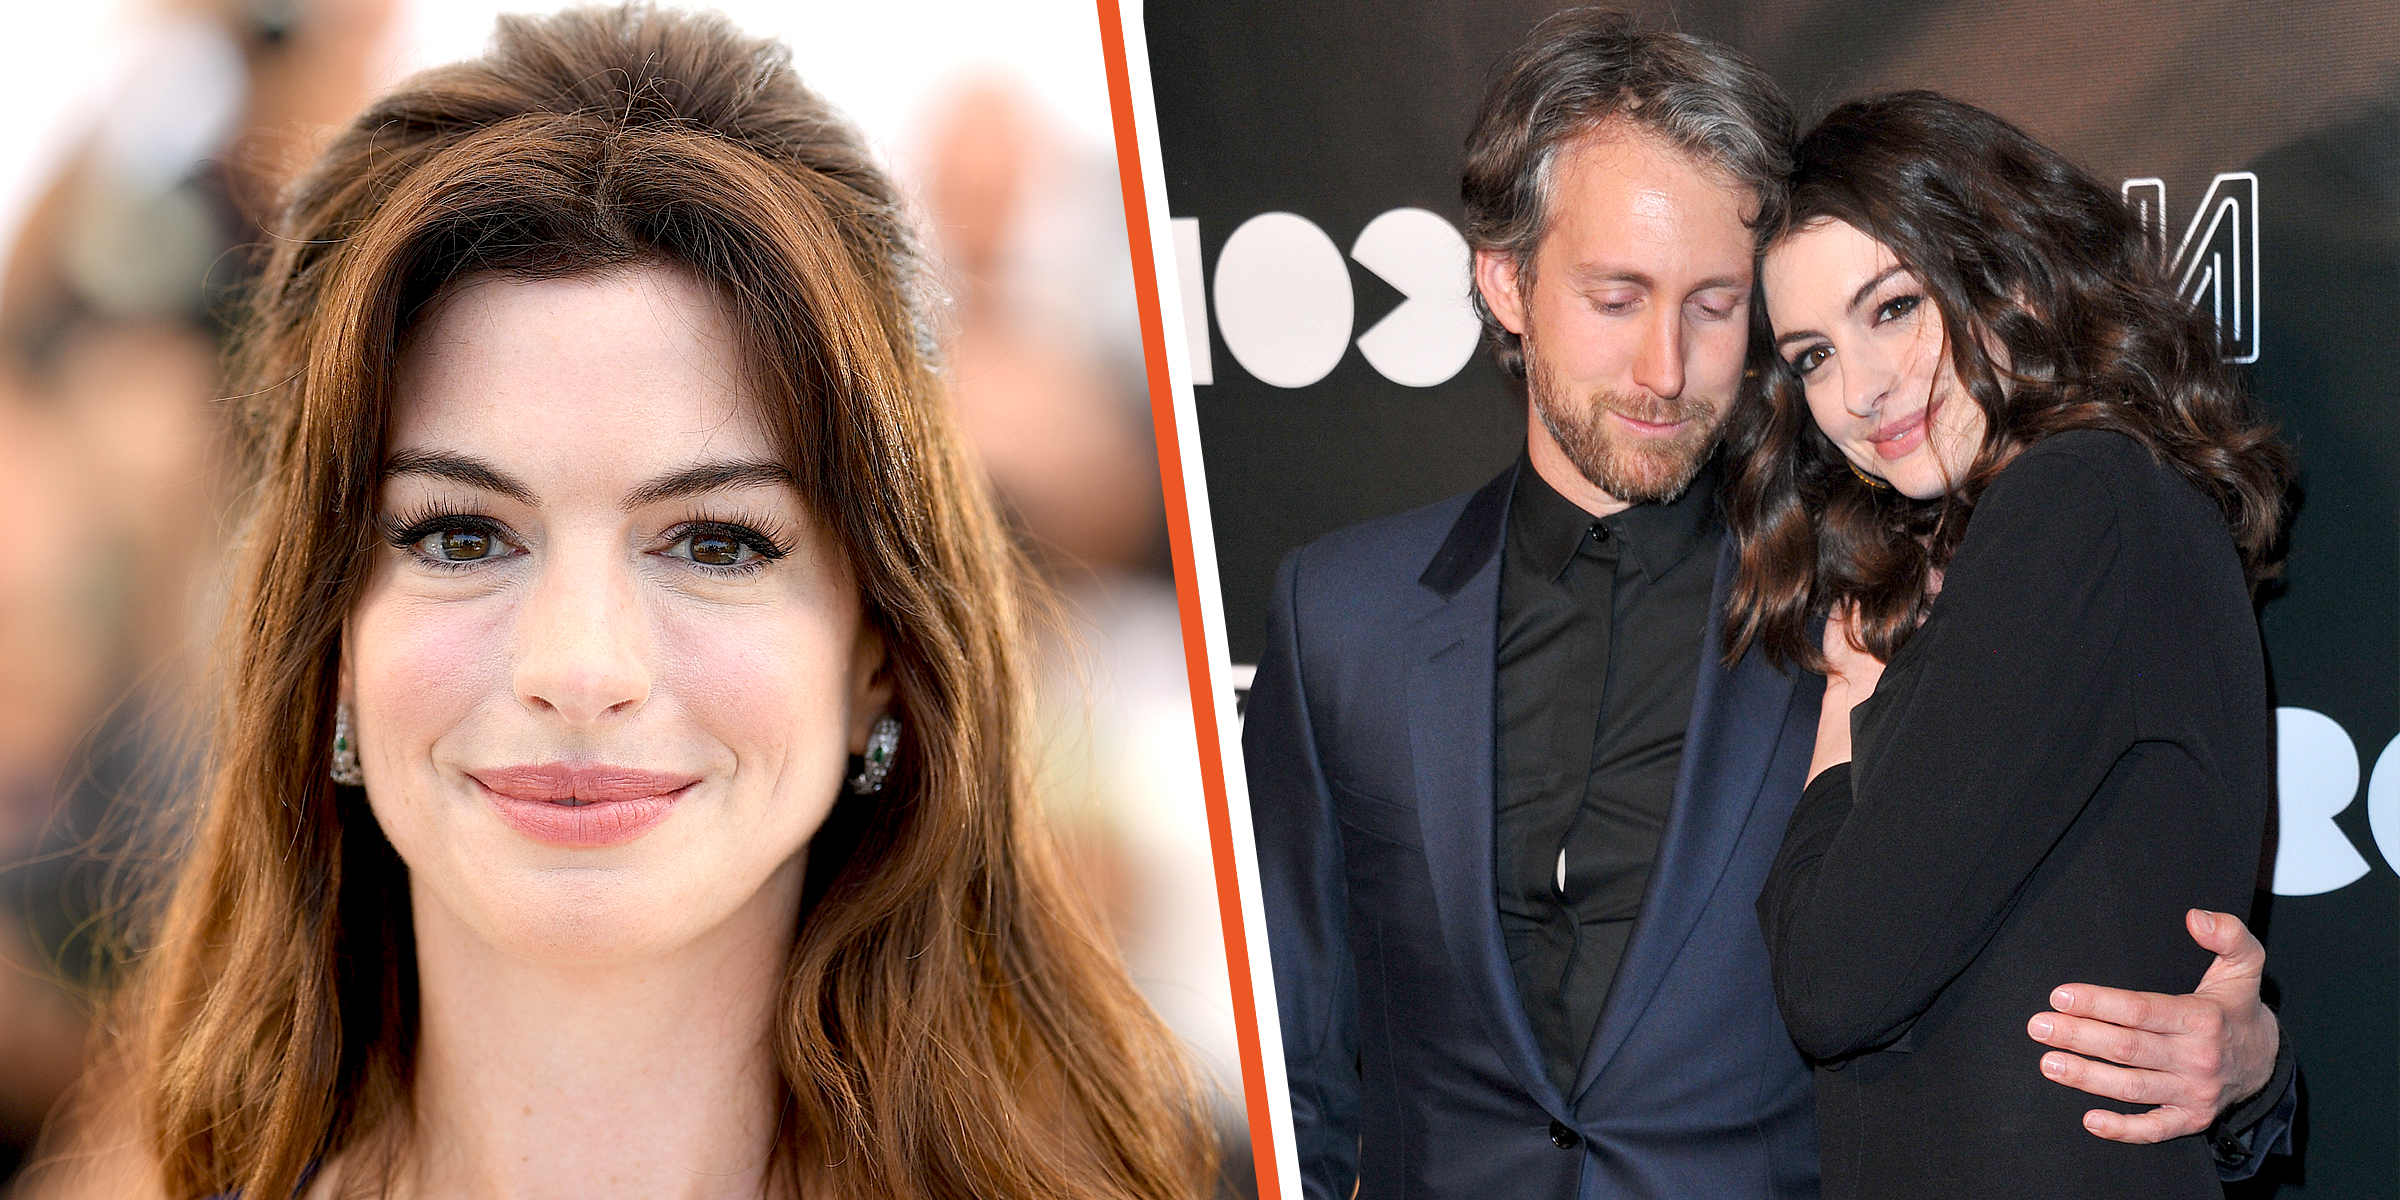 Anne Hathaway | Anne Hathaway and Adam Shulman | Source: Getty Images